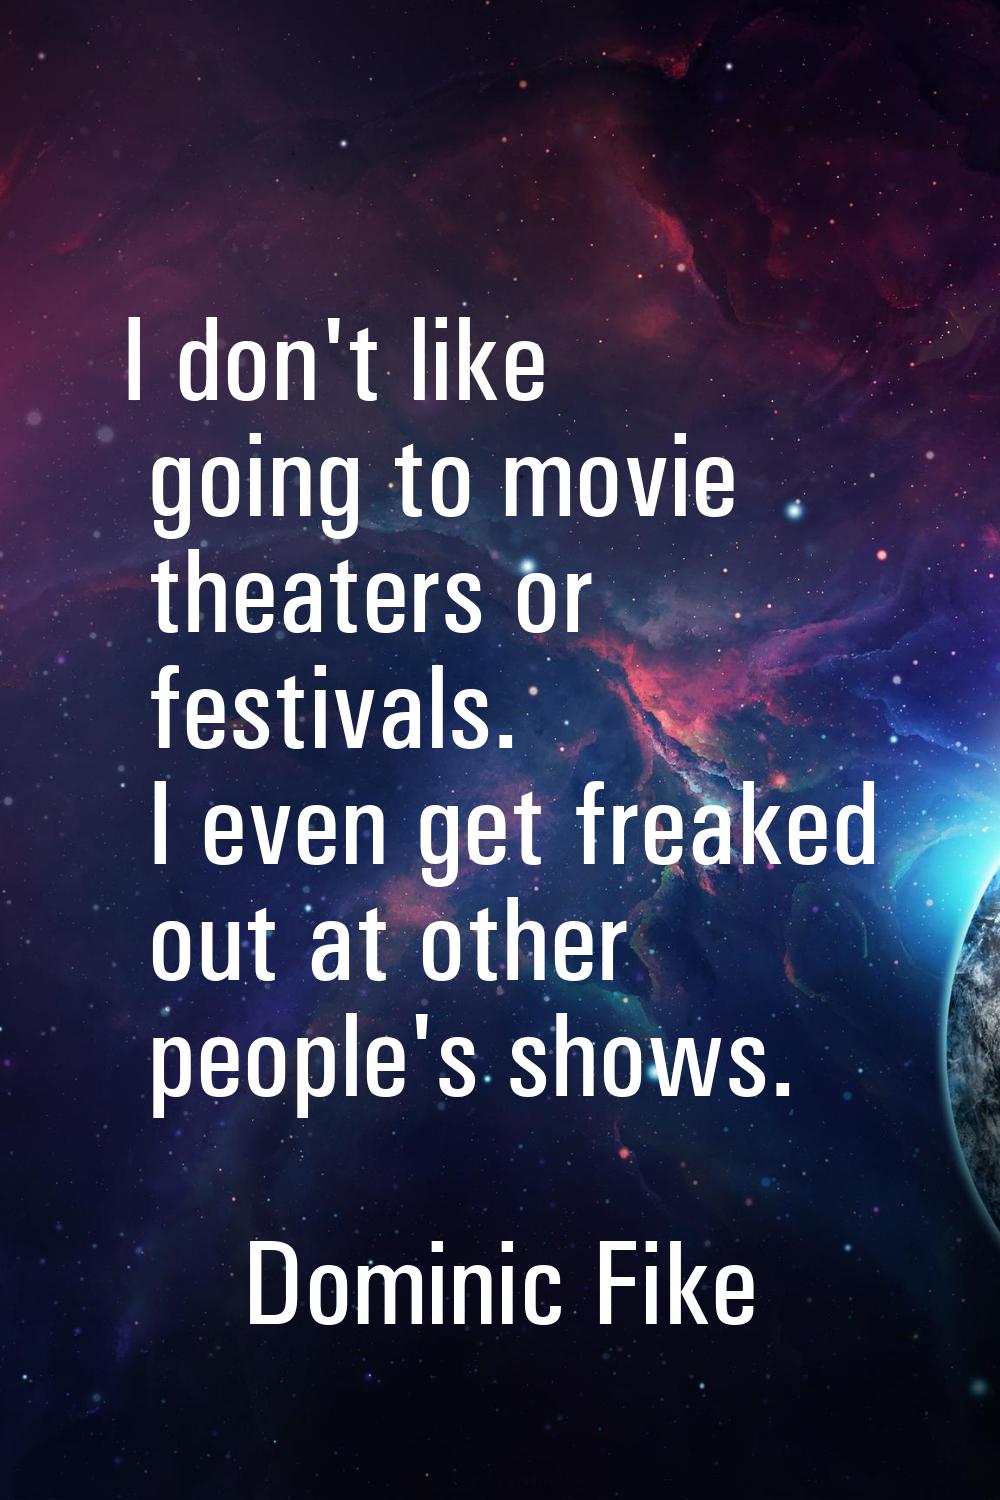 I don't like going to movie theaters or festivals. I even get freaked out at other people's shows.